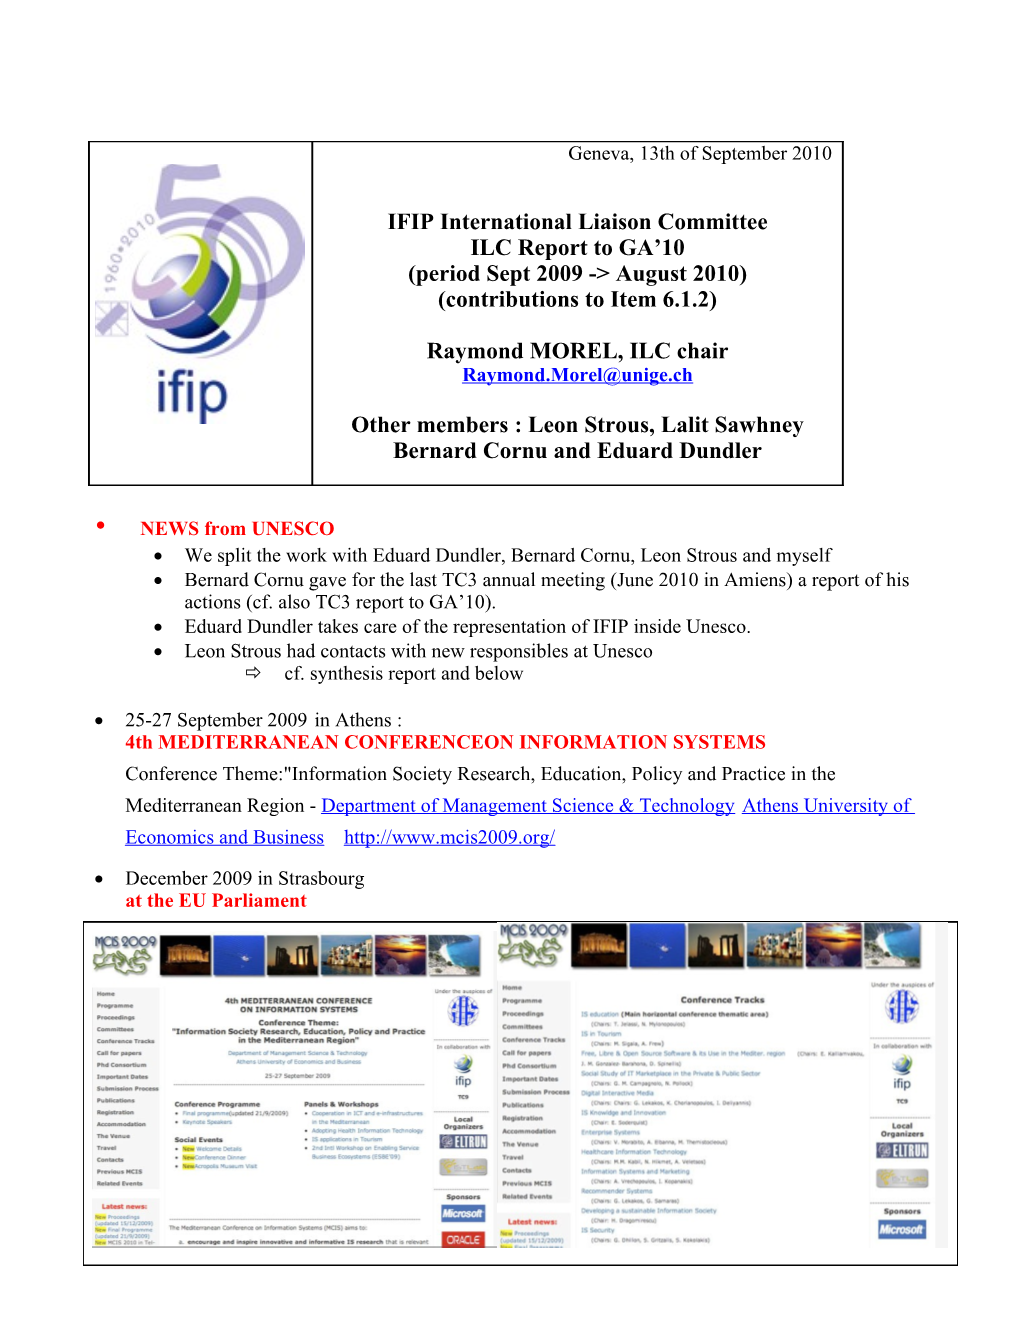 IFIP Vice-Chairman Report 96